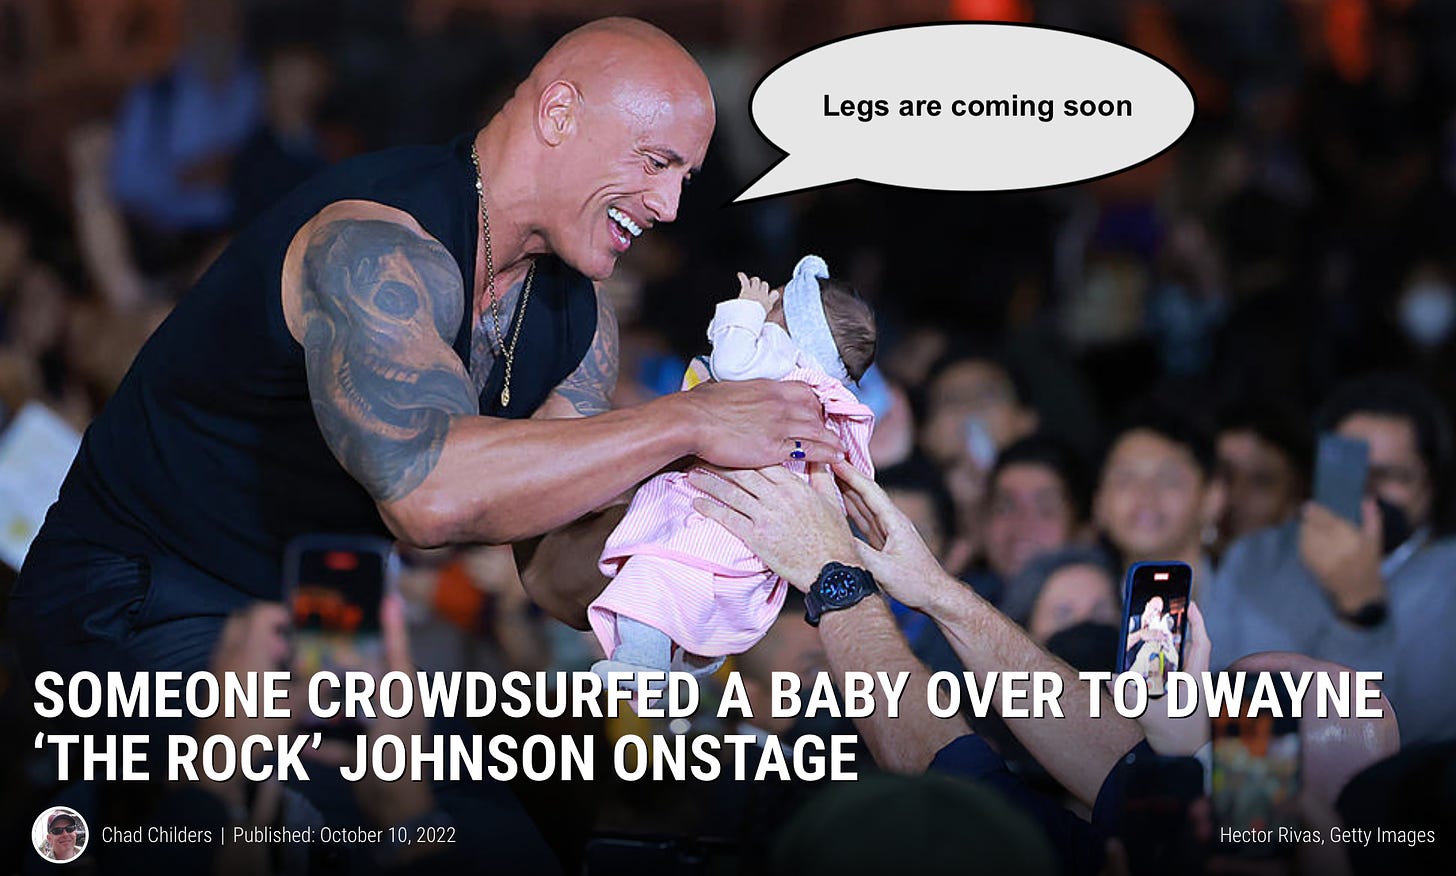 A screenshot of the title and hero image from the Loudwire story “Someone Crowdsurfed a Baby Over to Dwayne ‘The Rock’ Johnson Onstage” by Chad Childers. It has a big picture of Dwayne “The Rock” Johnson onstage, gently accepting a baby from the crowd with a huge smile, and in a word balloon he’s telling the baby: “Legs are coming soon” 